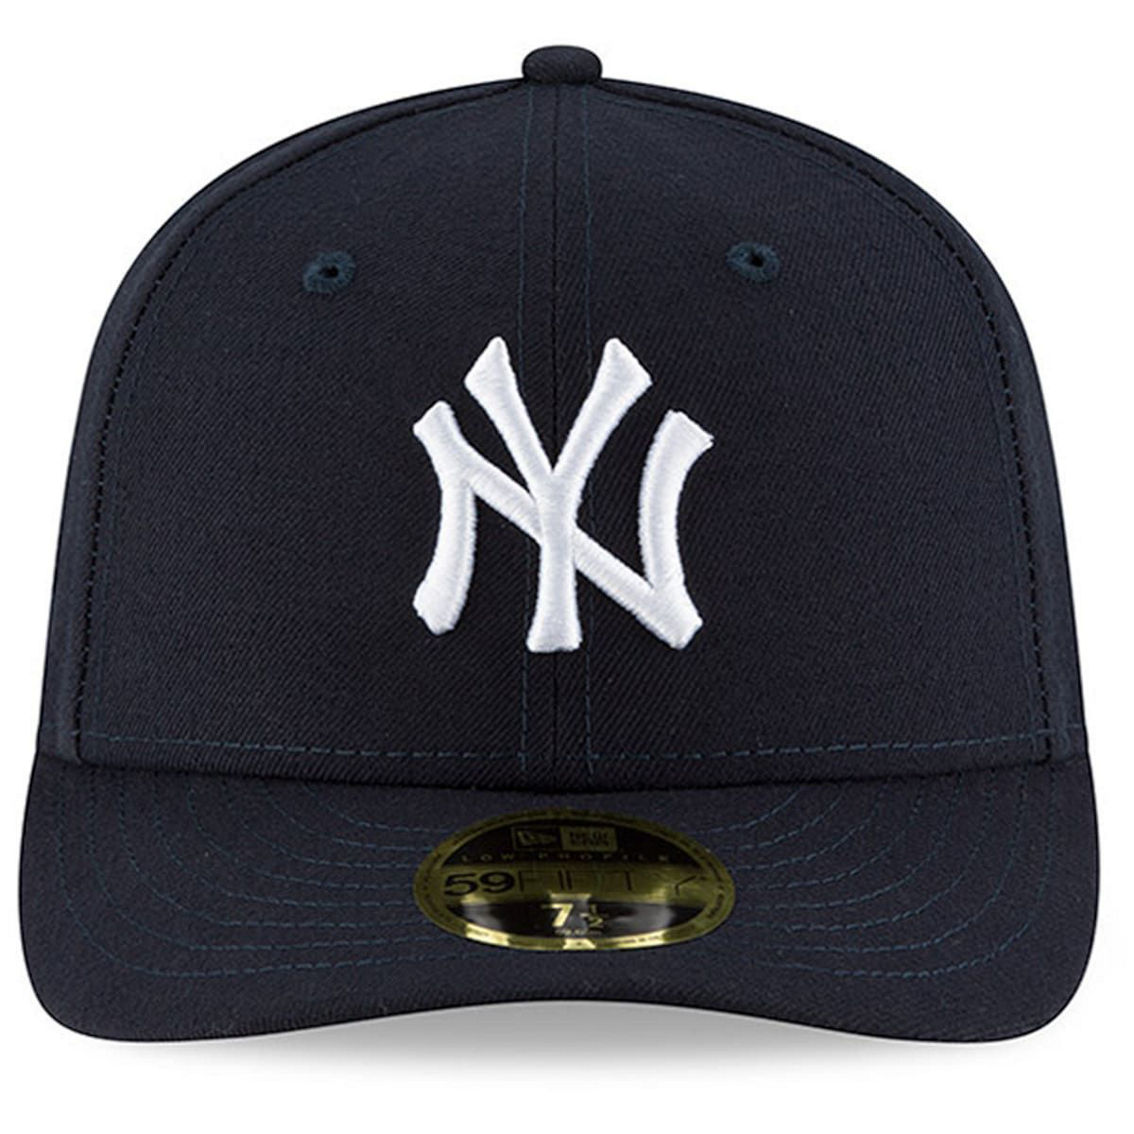 New Era Men's Navy New York Yankees Authentic Collection On Field Low Game 59FIFTY Fitted Hat - Image 3 of 4